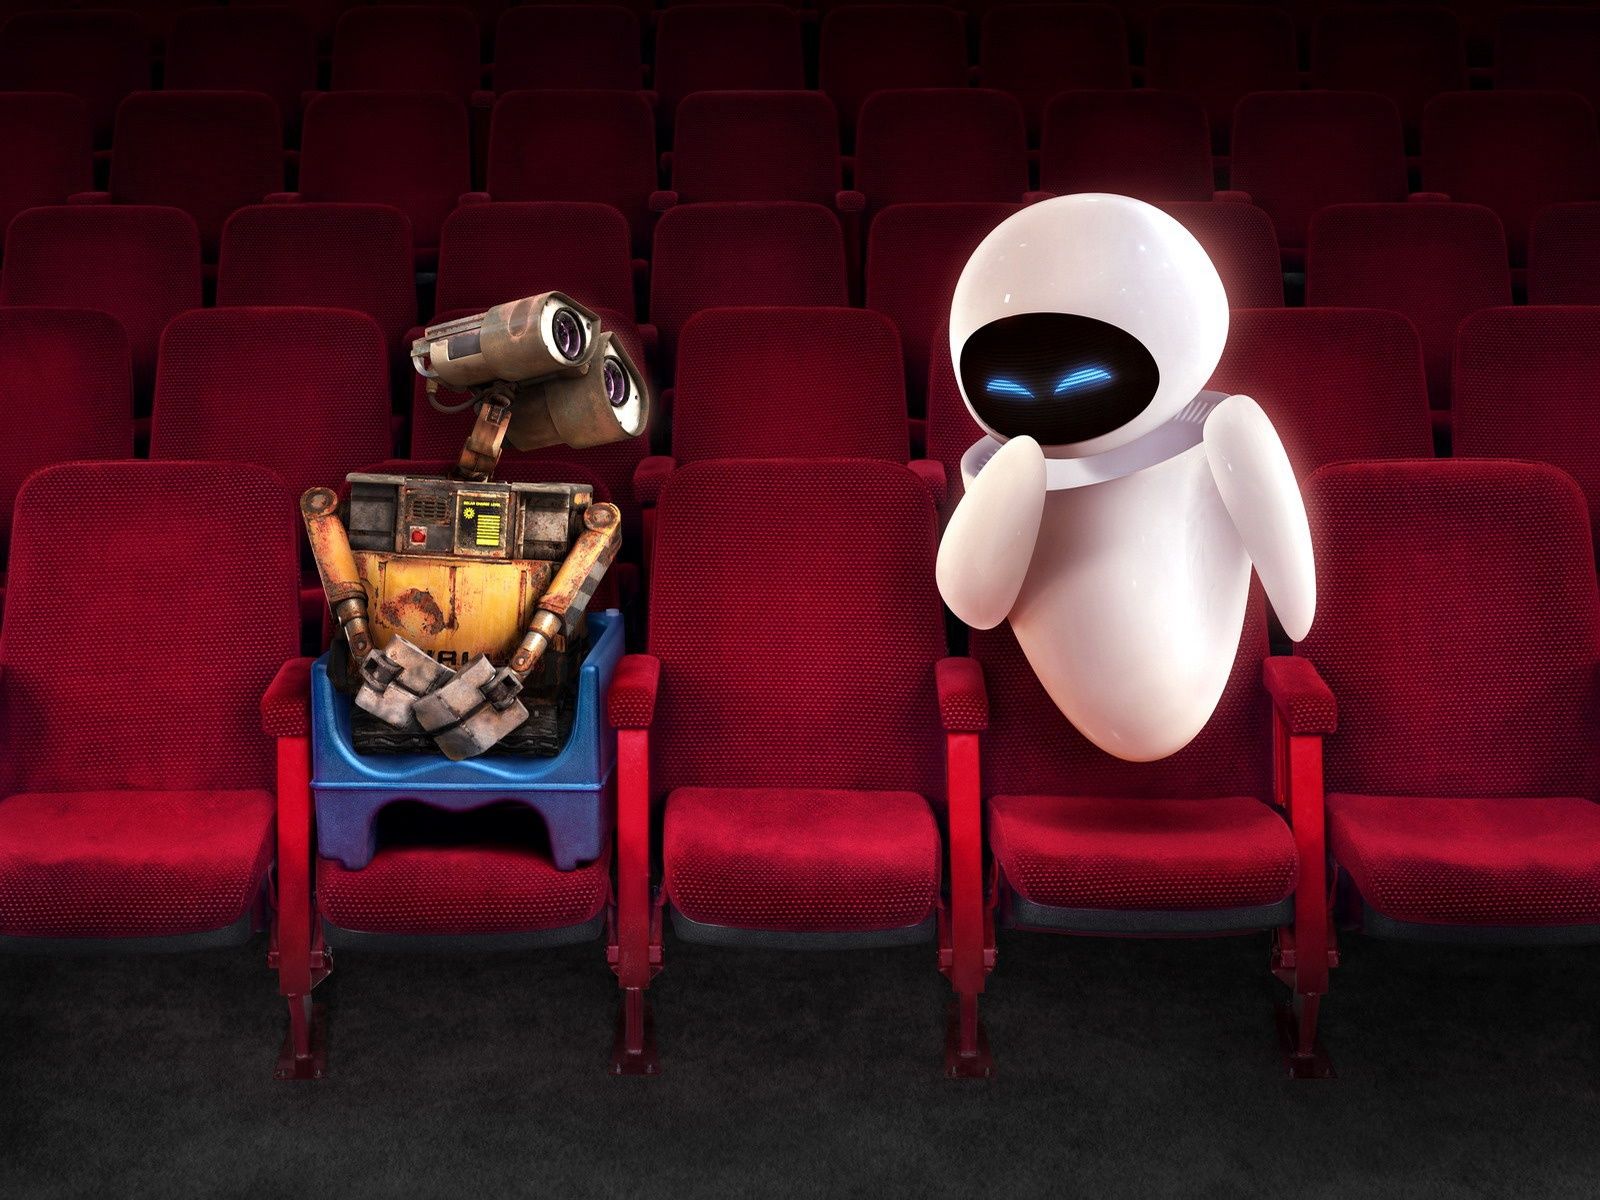 Wall E and EVE in Theater Wallpaper in jpg format for free download